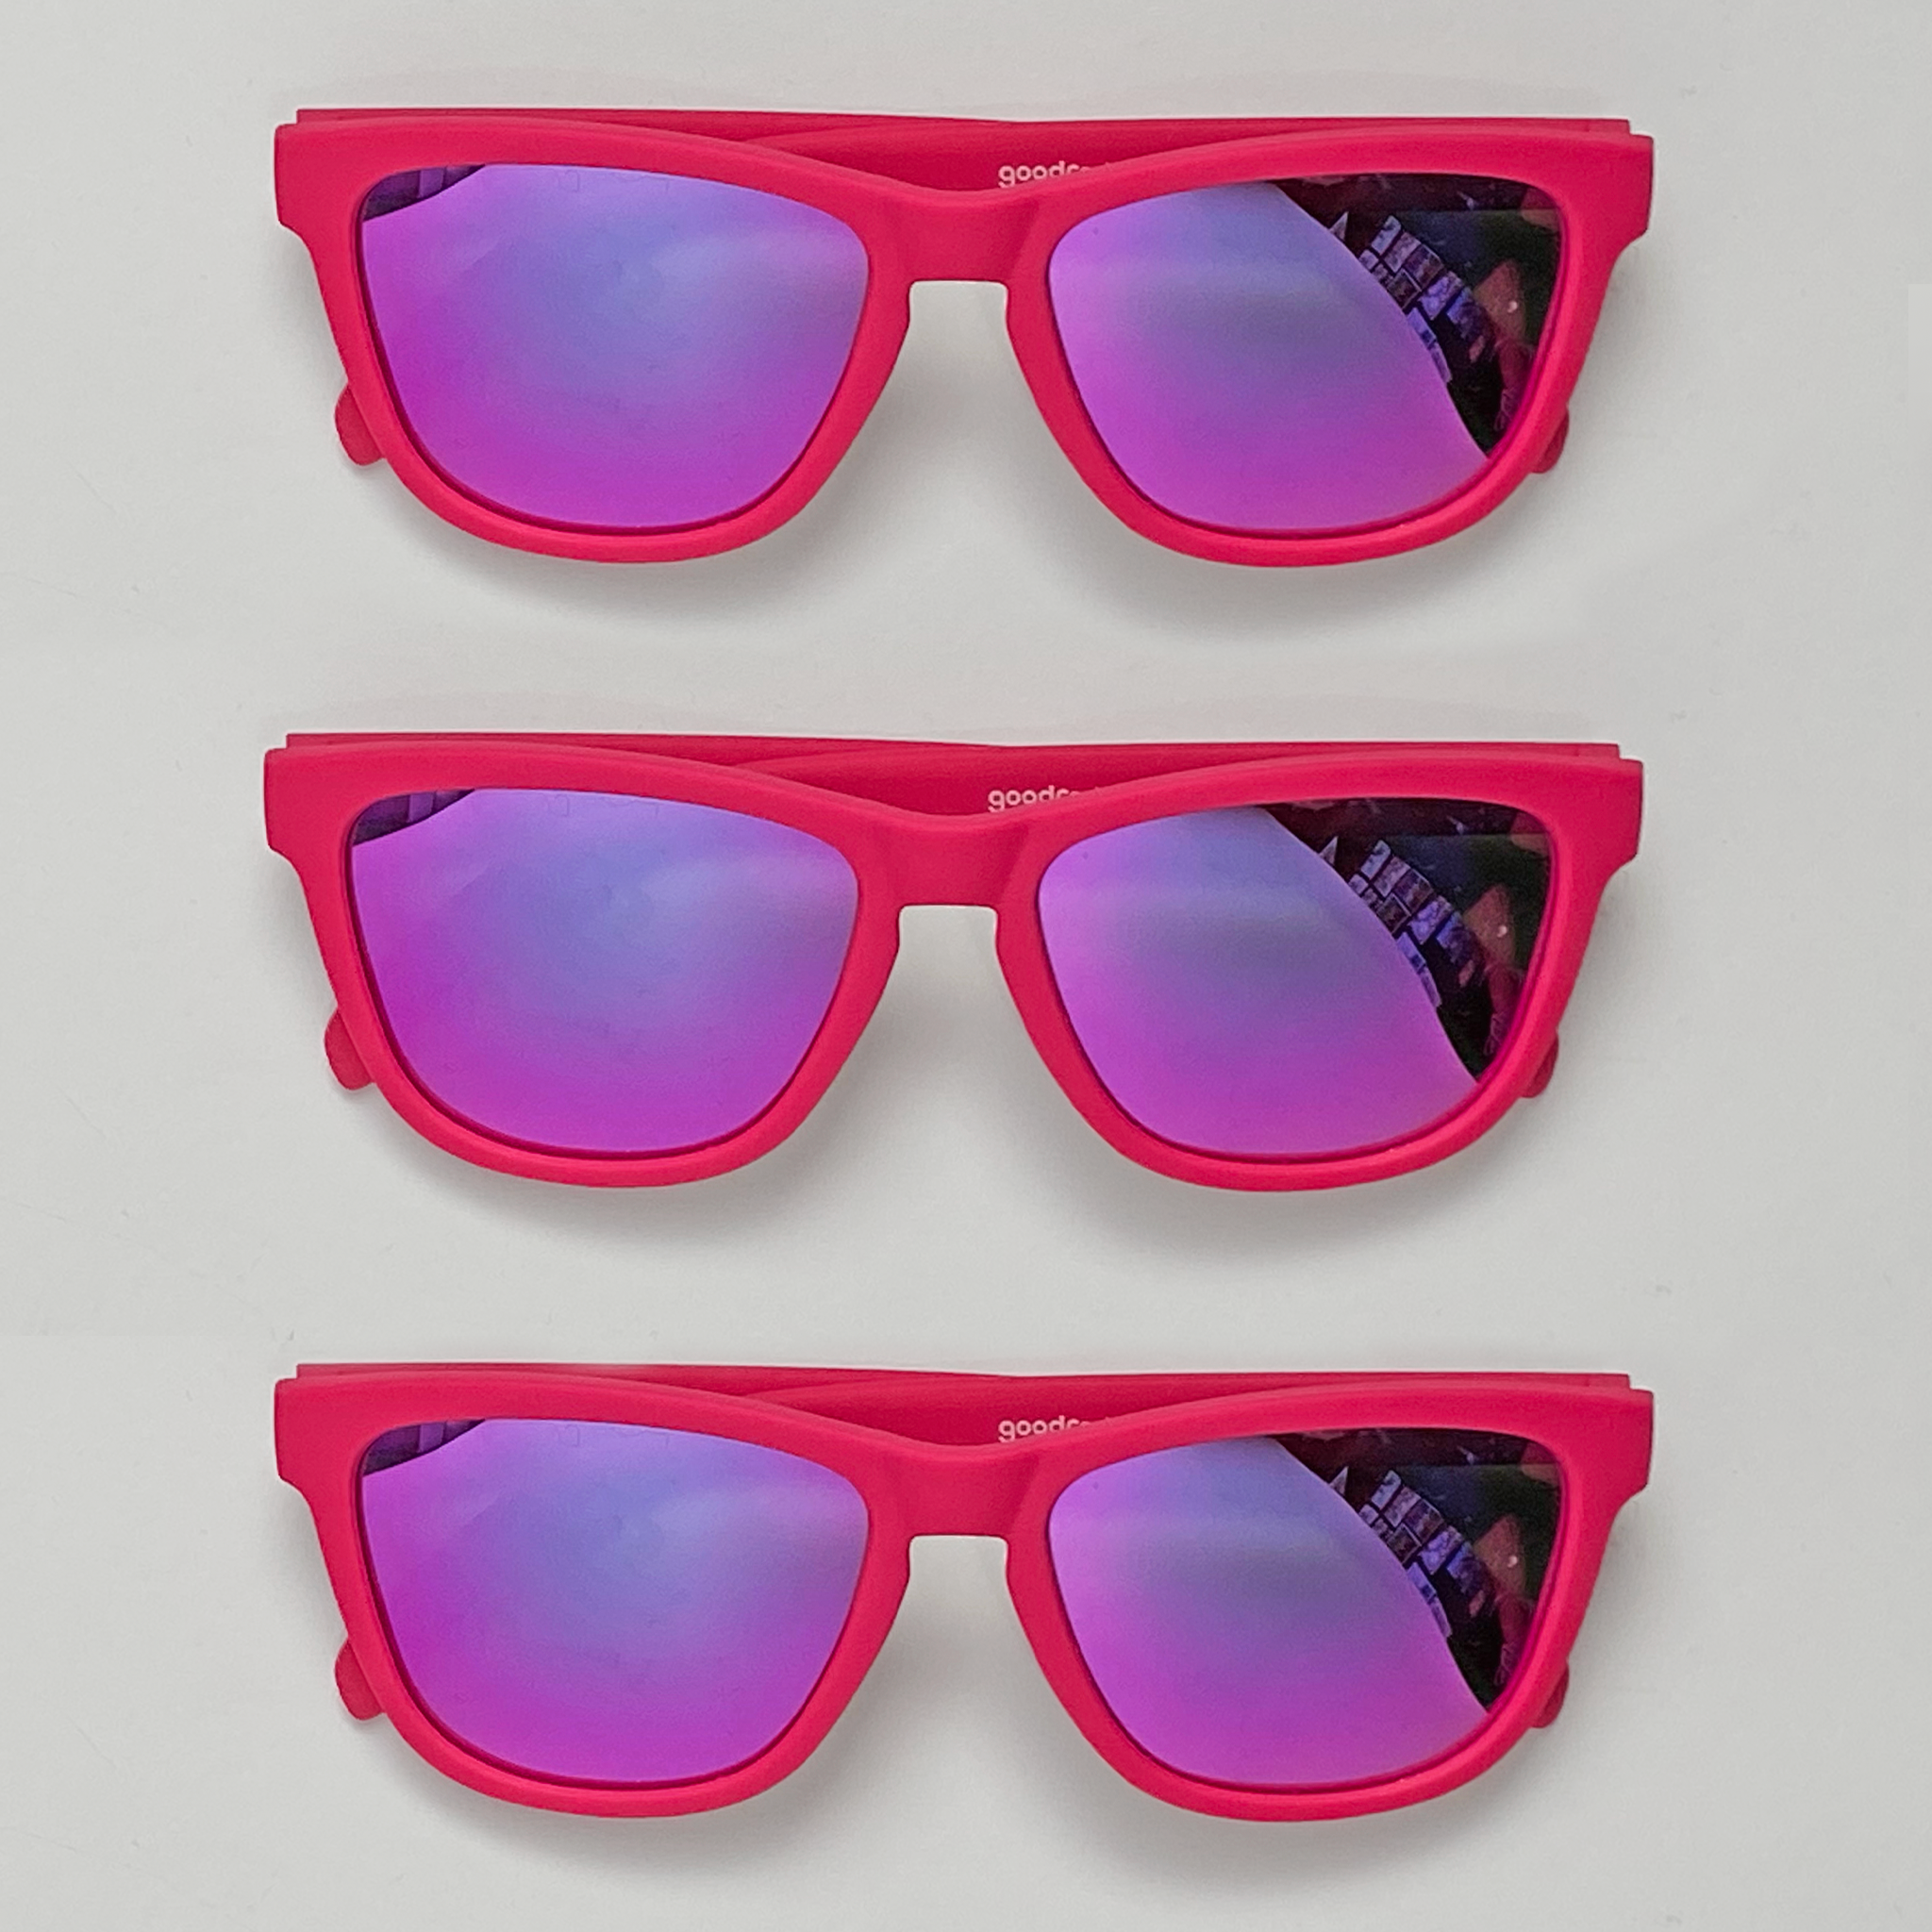 picture of pink sunglasses. click to shop sunglasses.